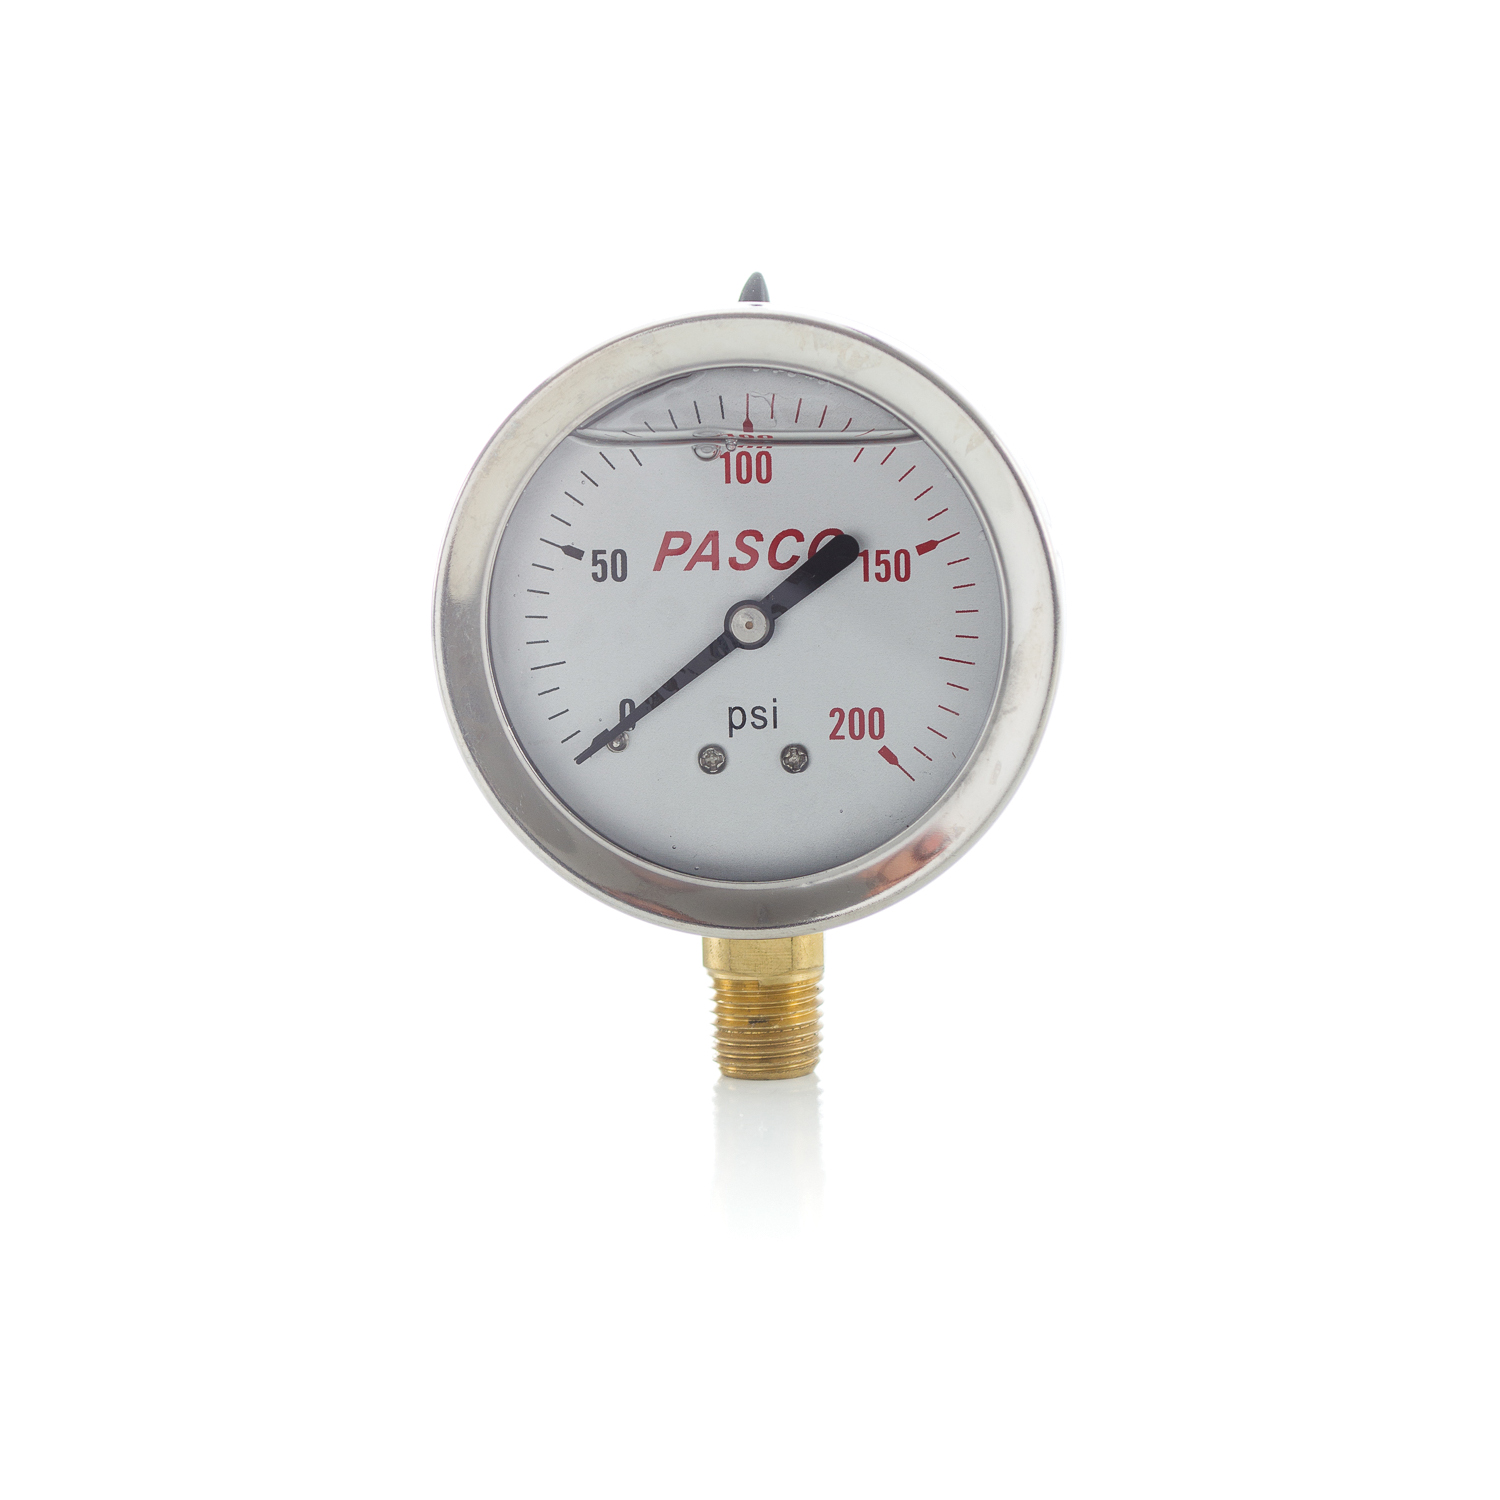 PASCO 1776 Pressure Gauge, 0 to 200 psi, 1/4 in MNPT Connection, 2-1/2 in Dial, +/- 3-2-3 %